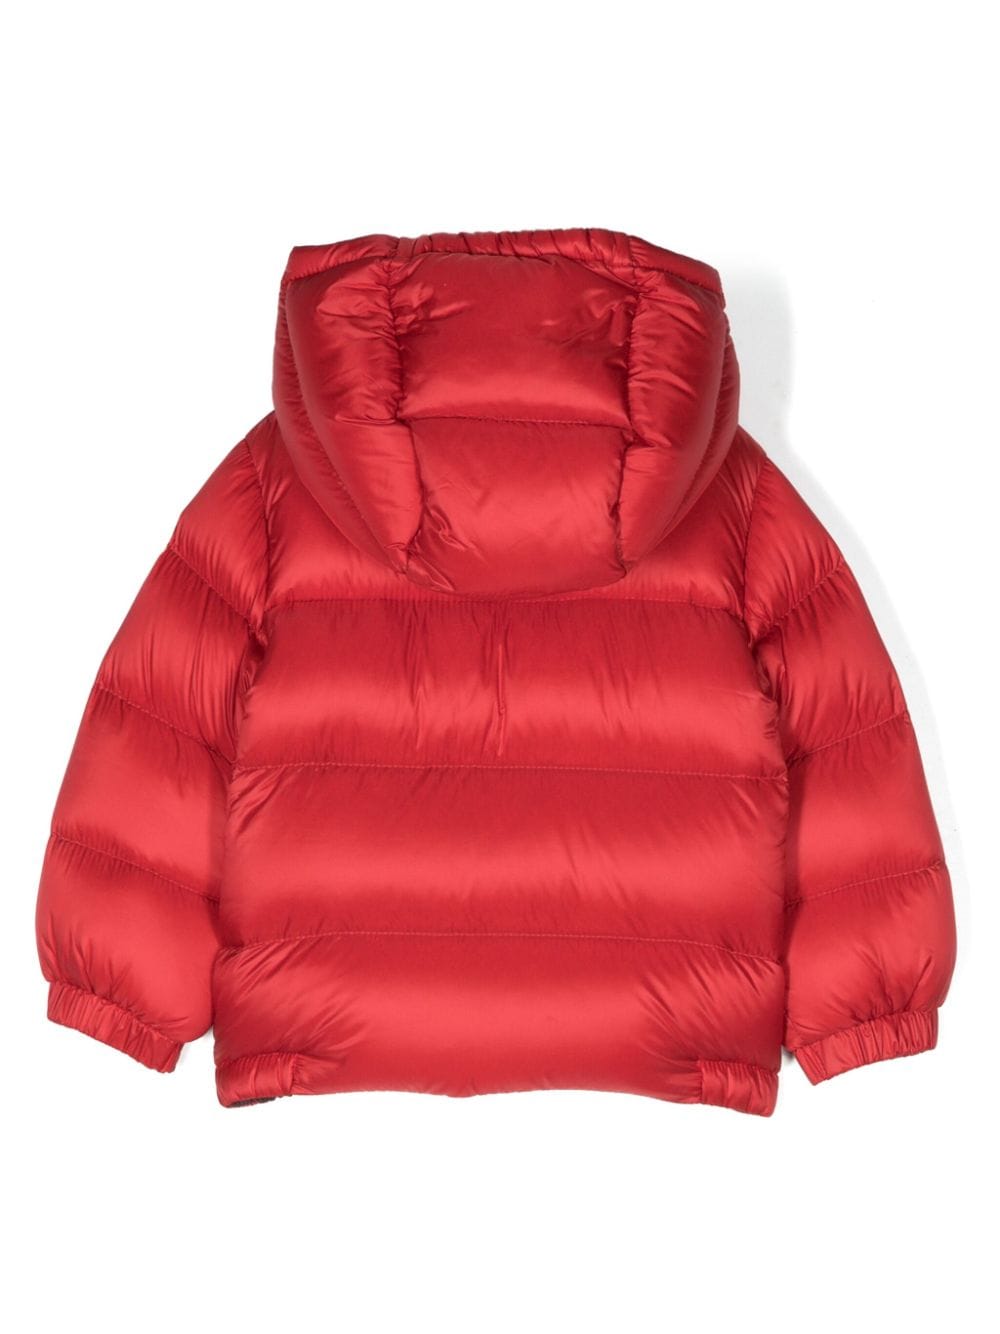 New Macaire red jacket for newborn girls